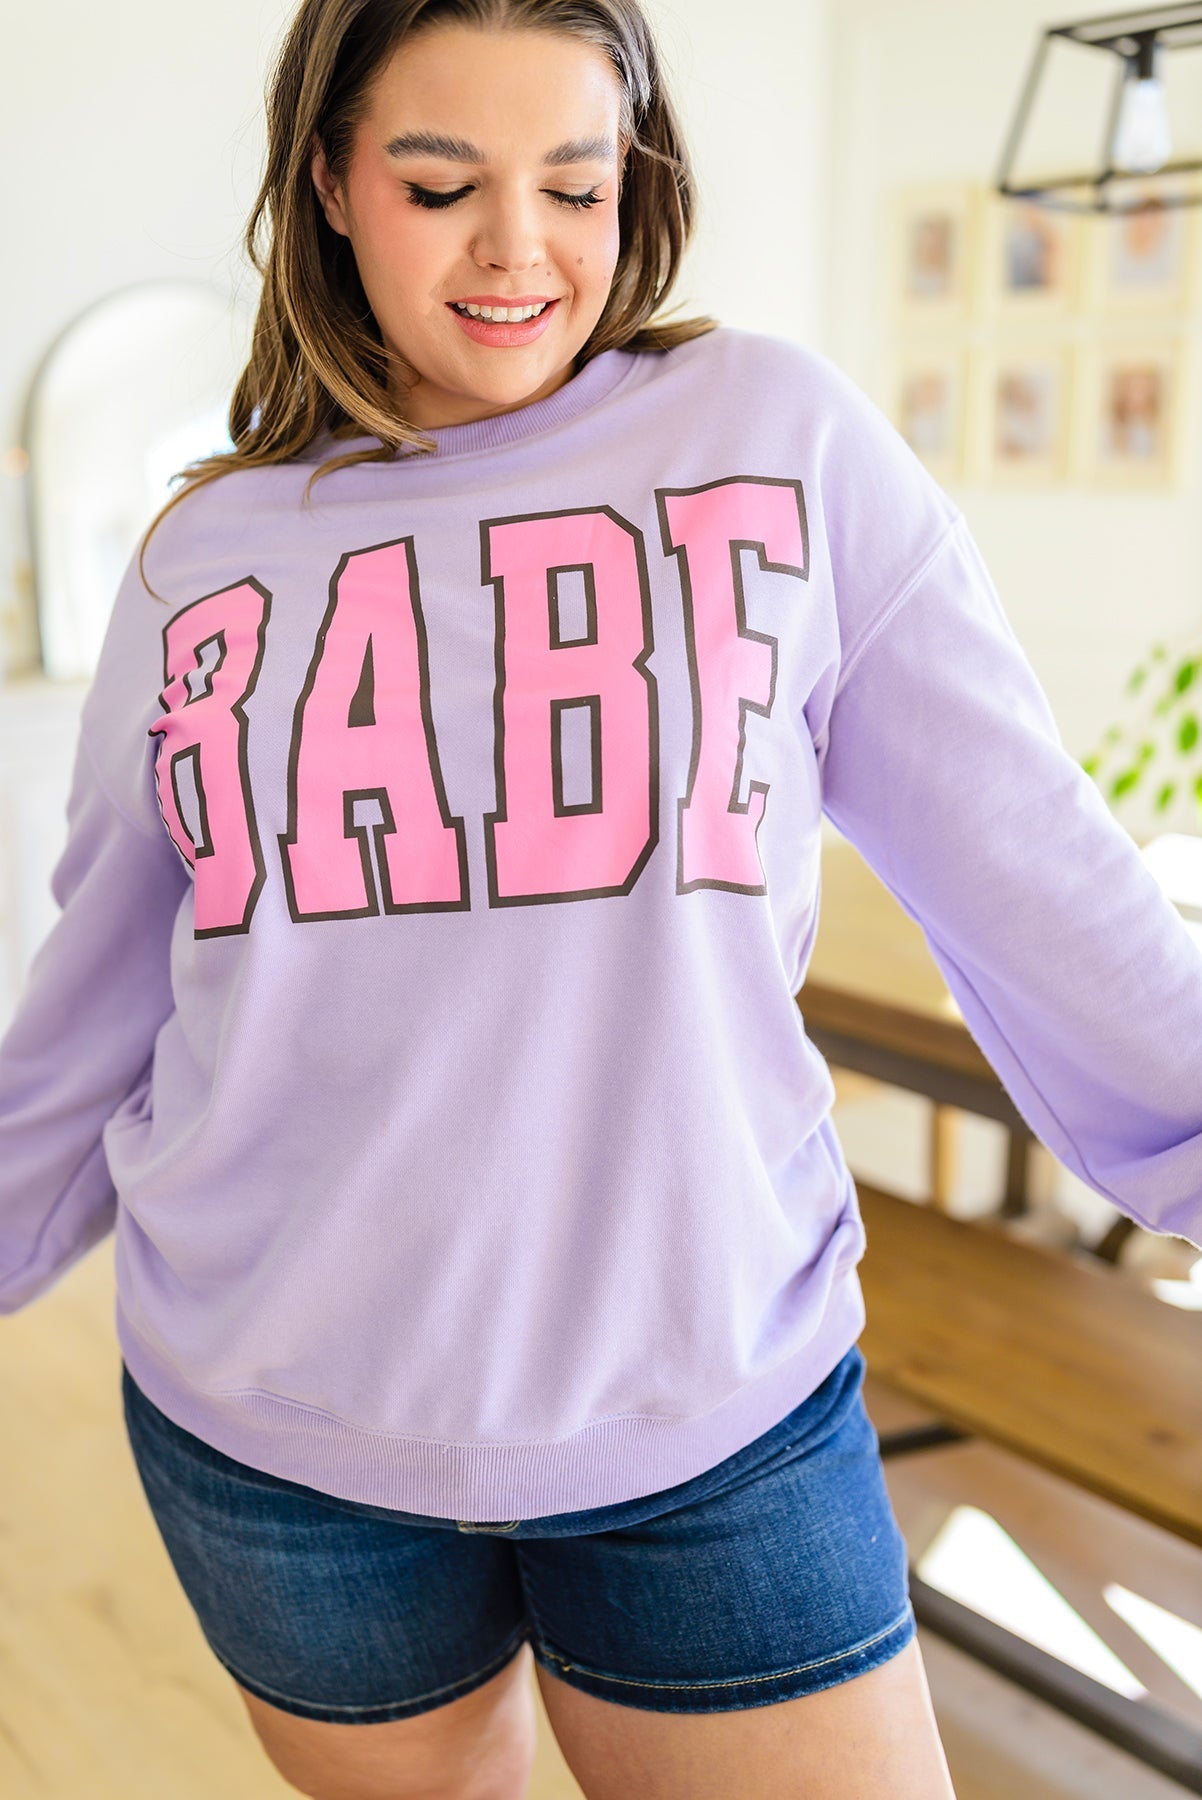 She’s a Babe Sweater - Womens